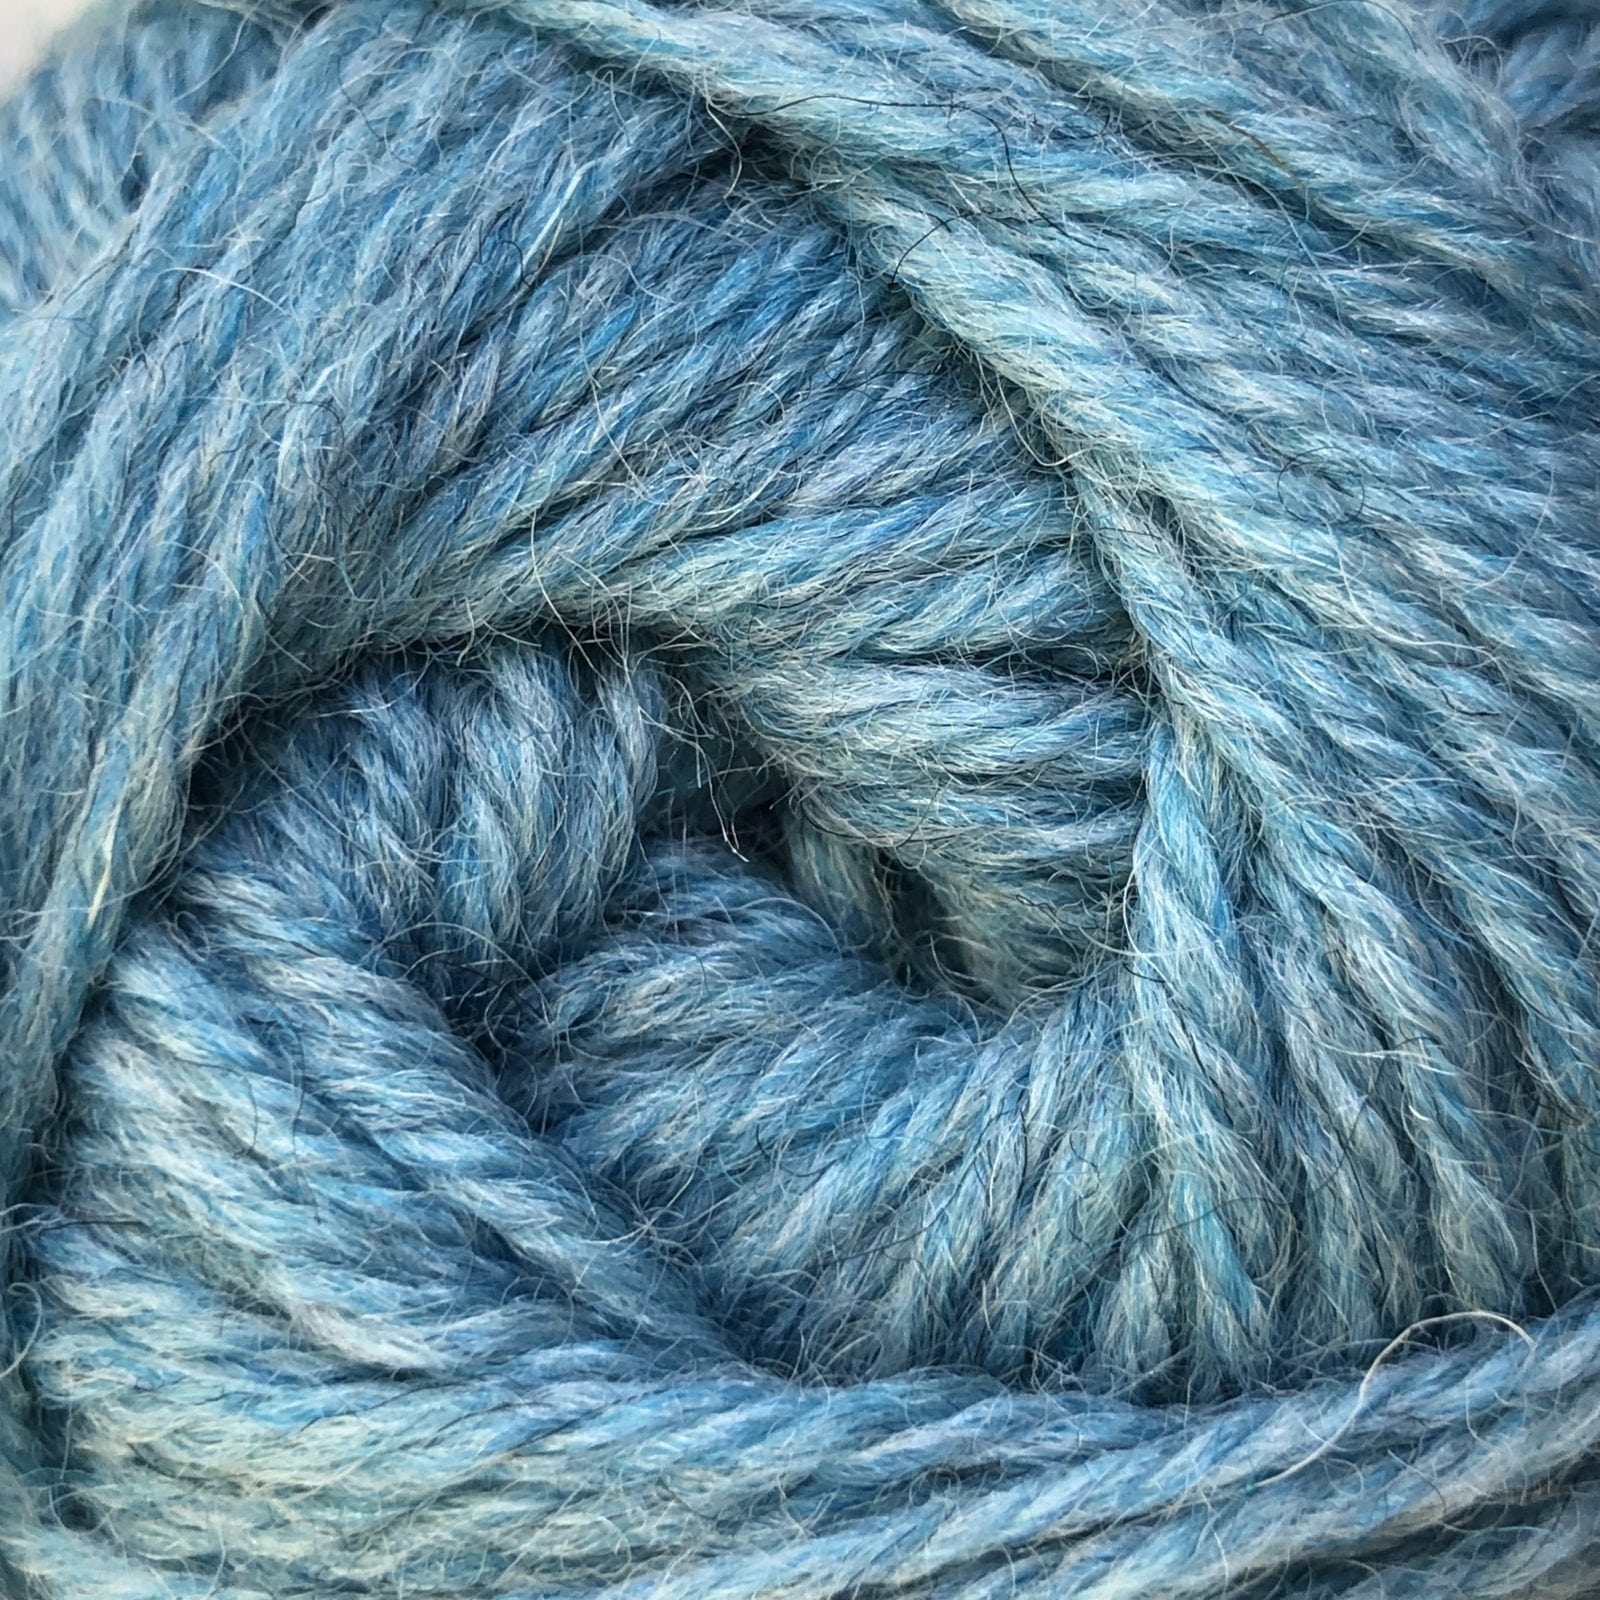 Countrywide Windsor 100% New Zealand wool yarn 8ply 8 ply double knit dk Marled Blue Shade 81